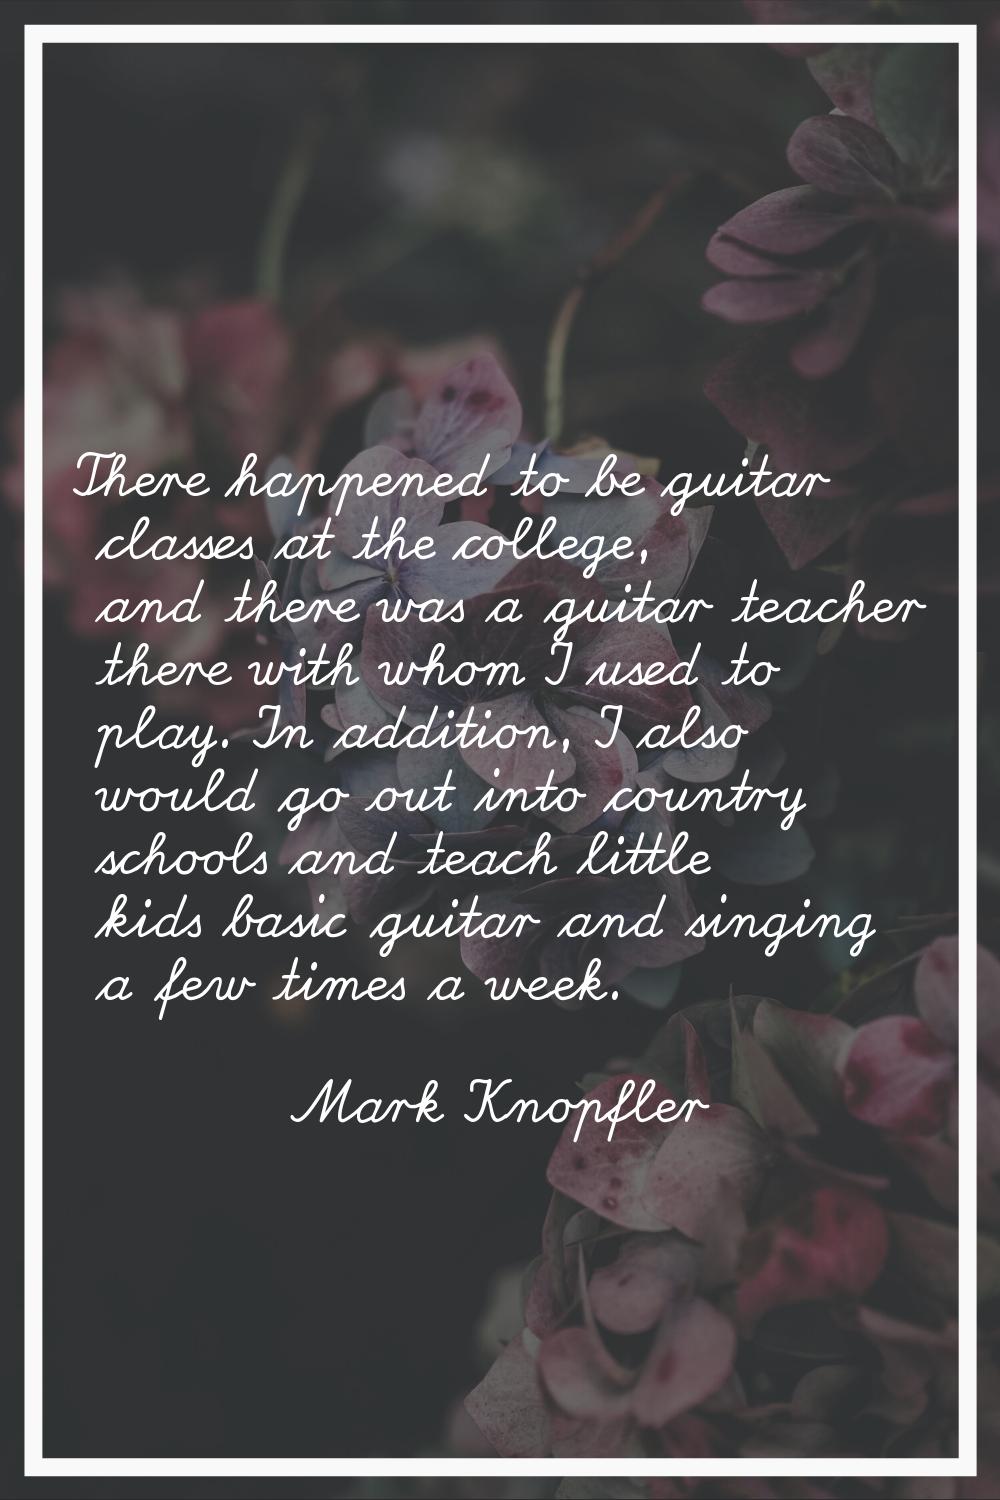 There happened to be guitar classes at the college, and there was a guitar teacher there with whom 